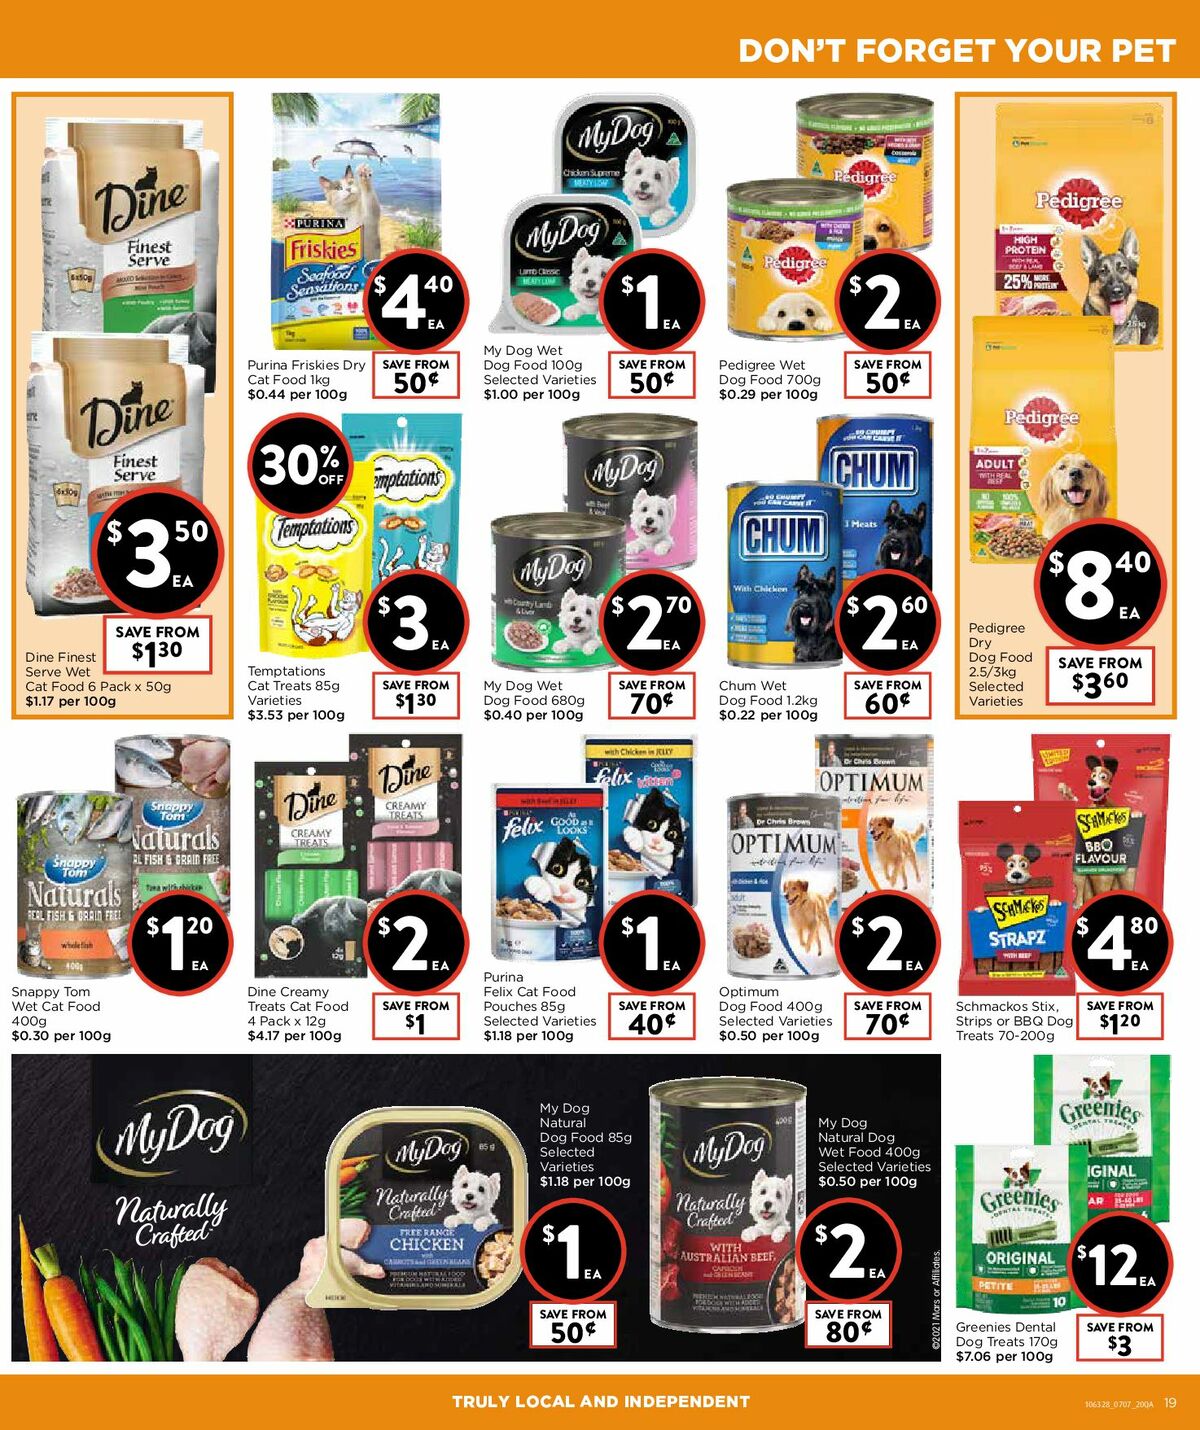 FoodWorks Supermarket Catalogues from 7 July